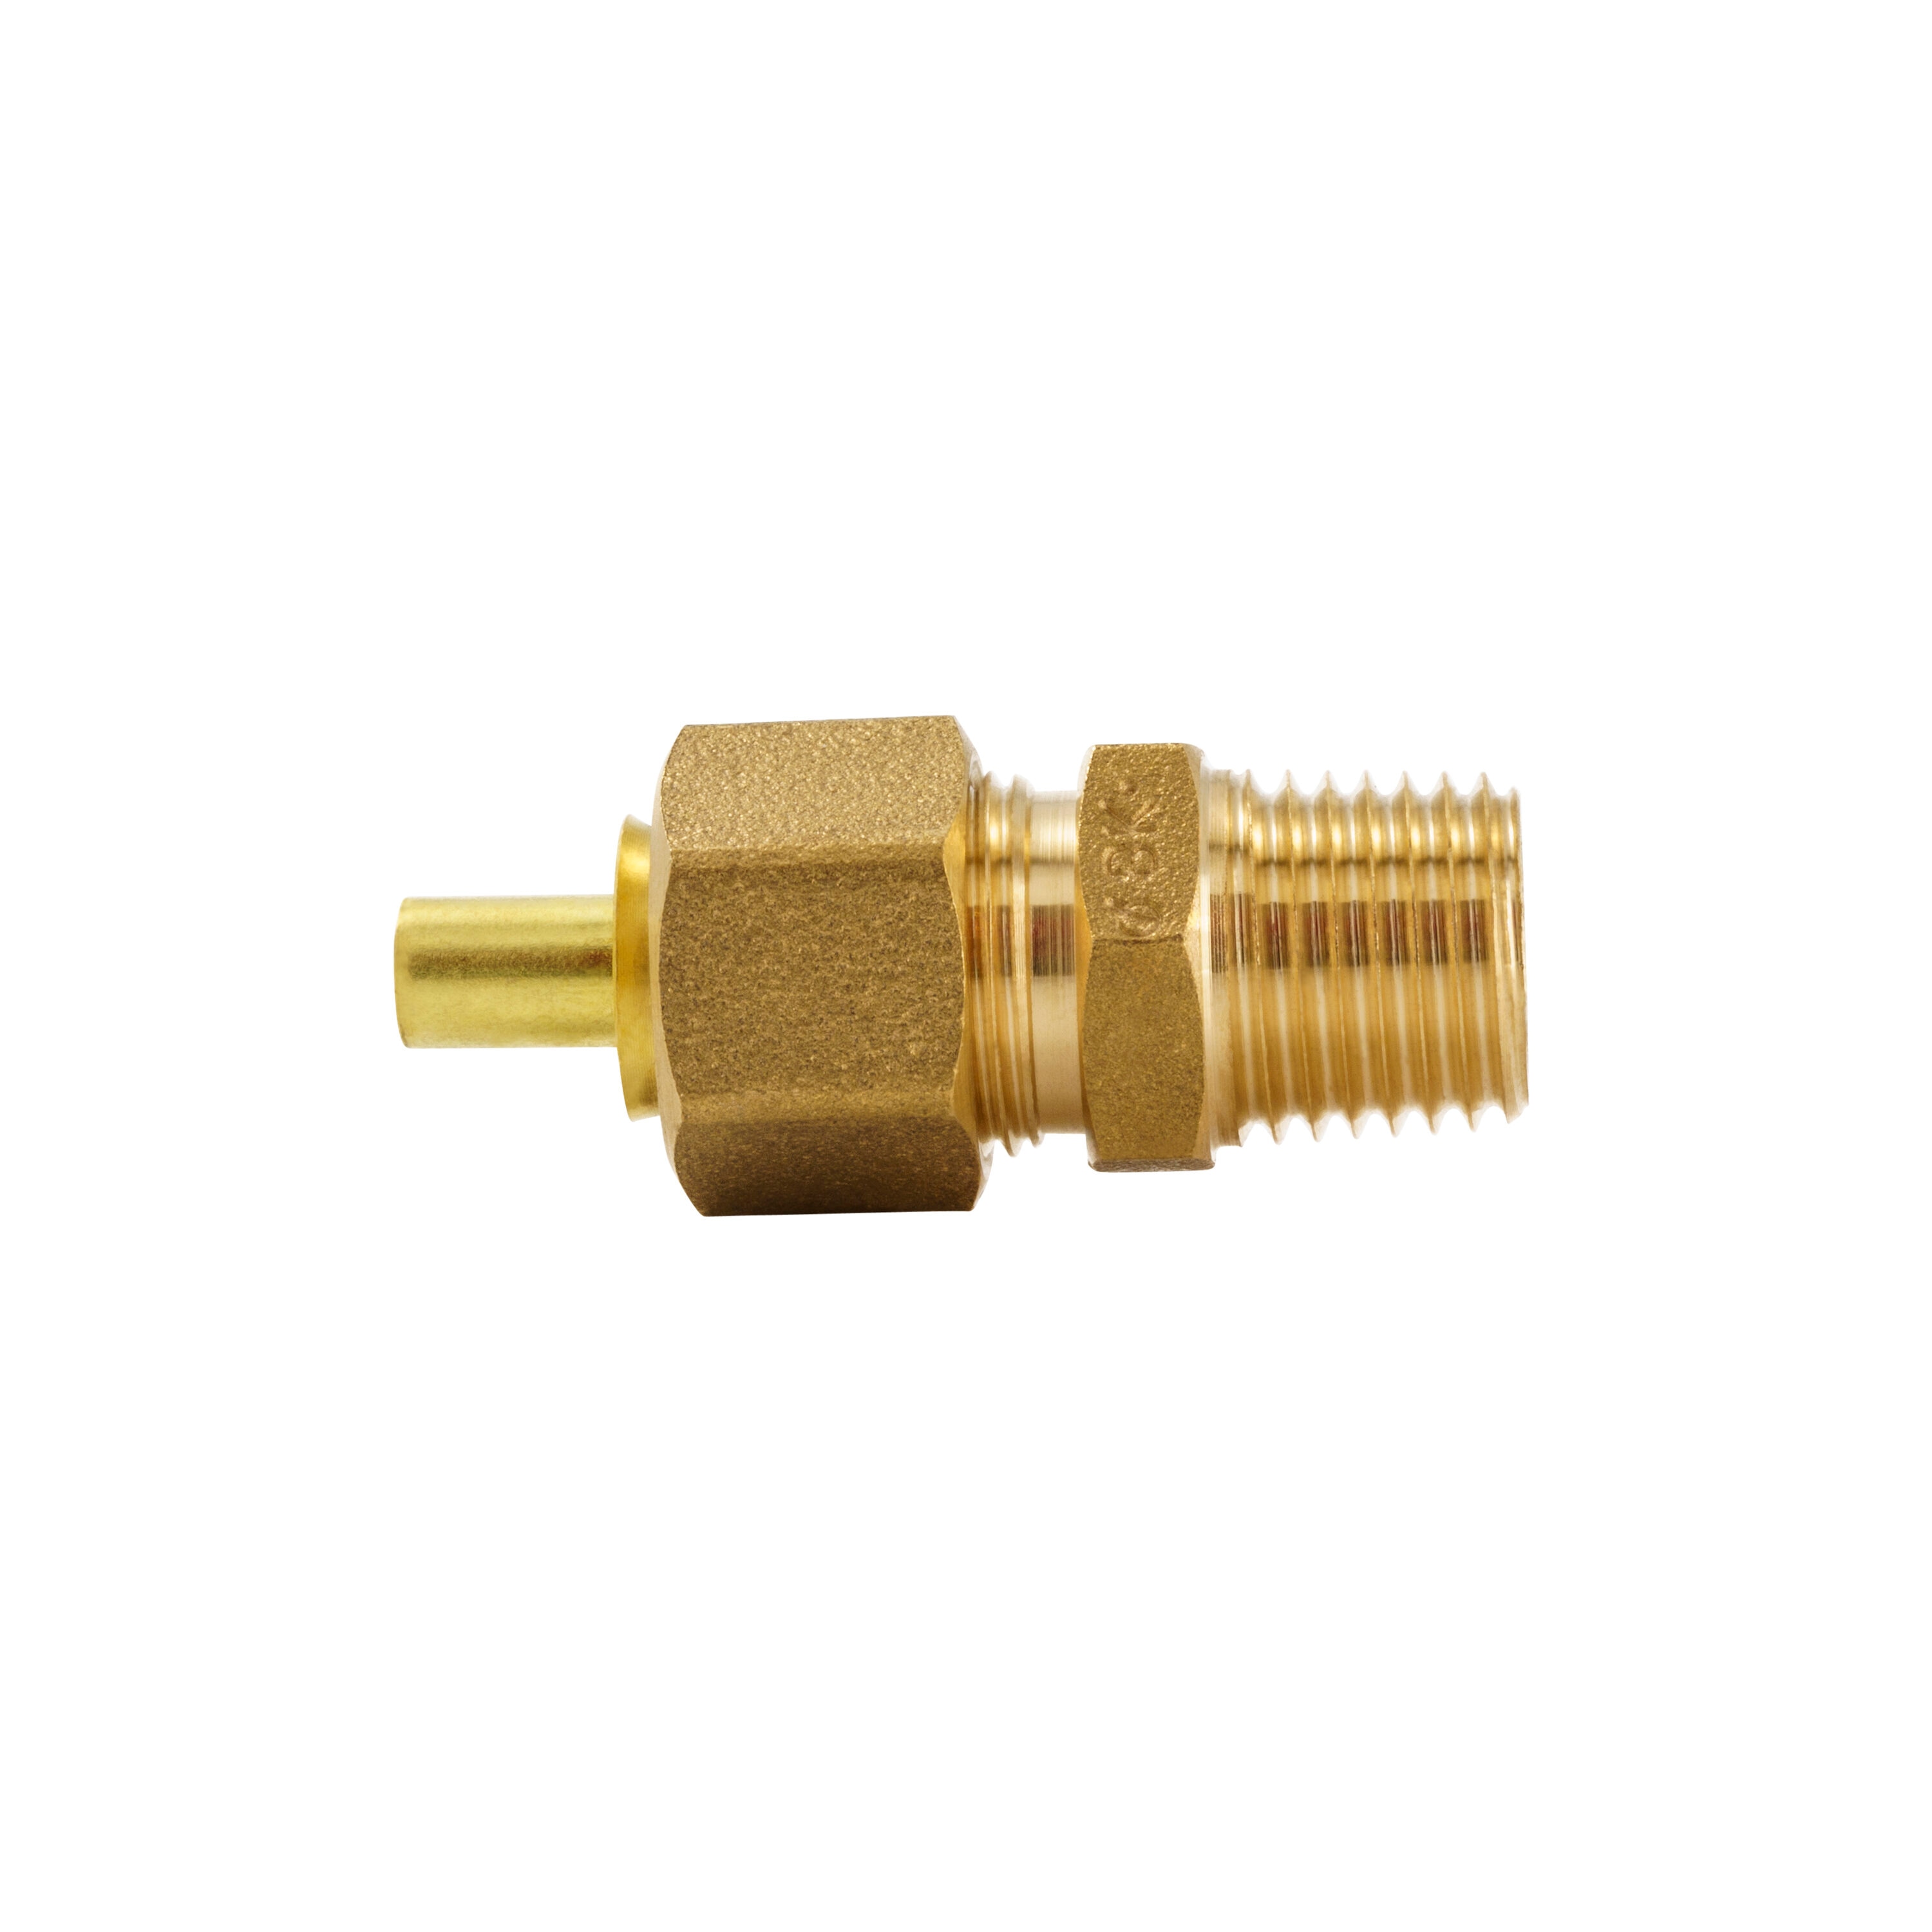 Proline Series 3/8-in x 1/4-in Compression Coupling Fitting in the